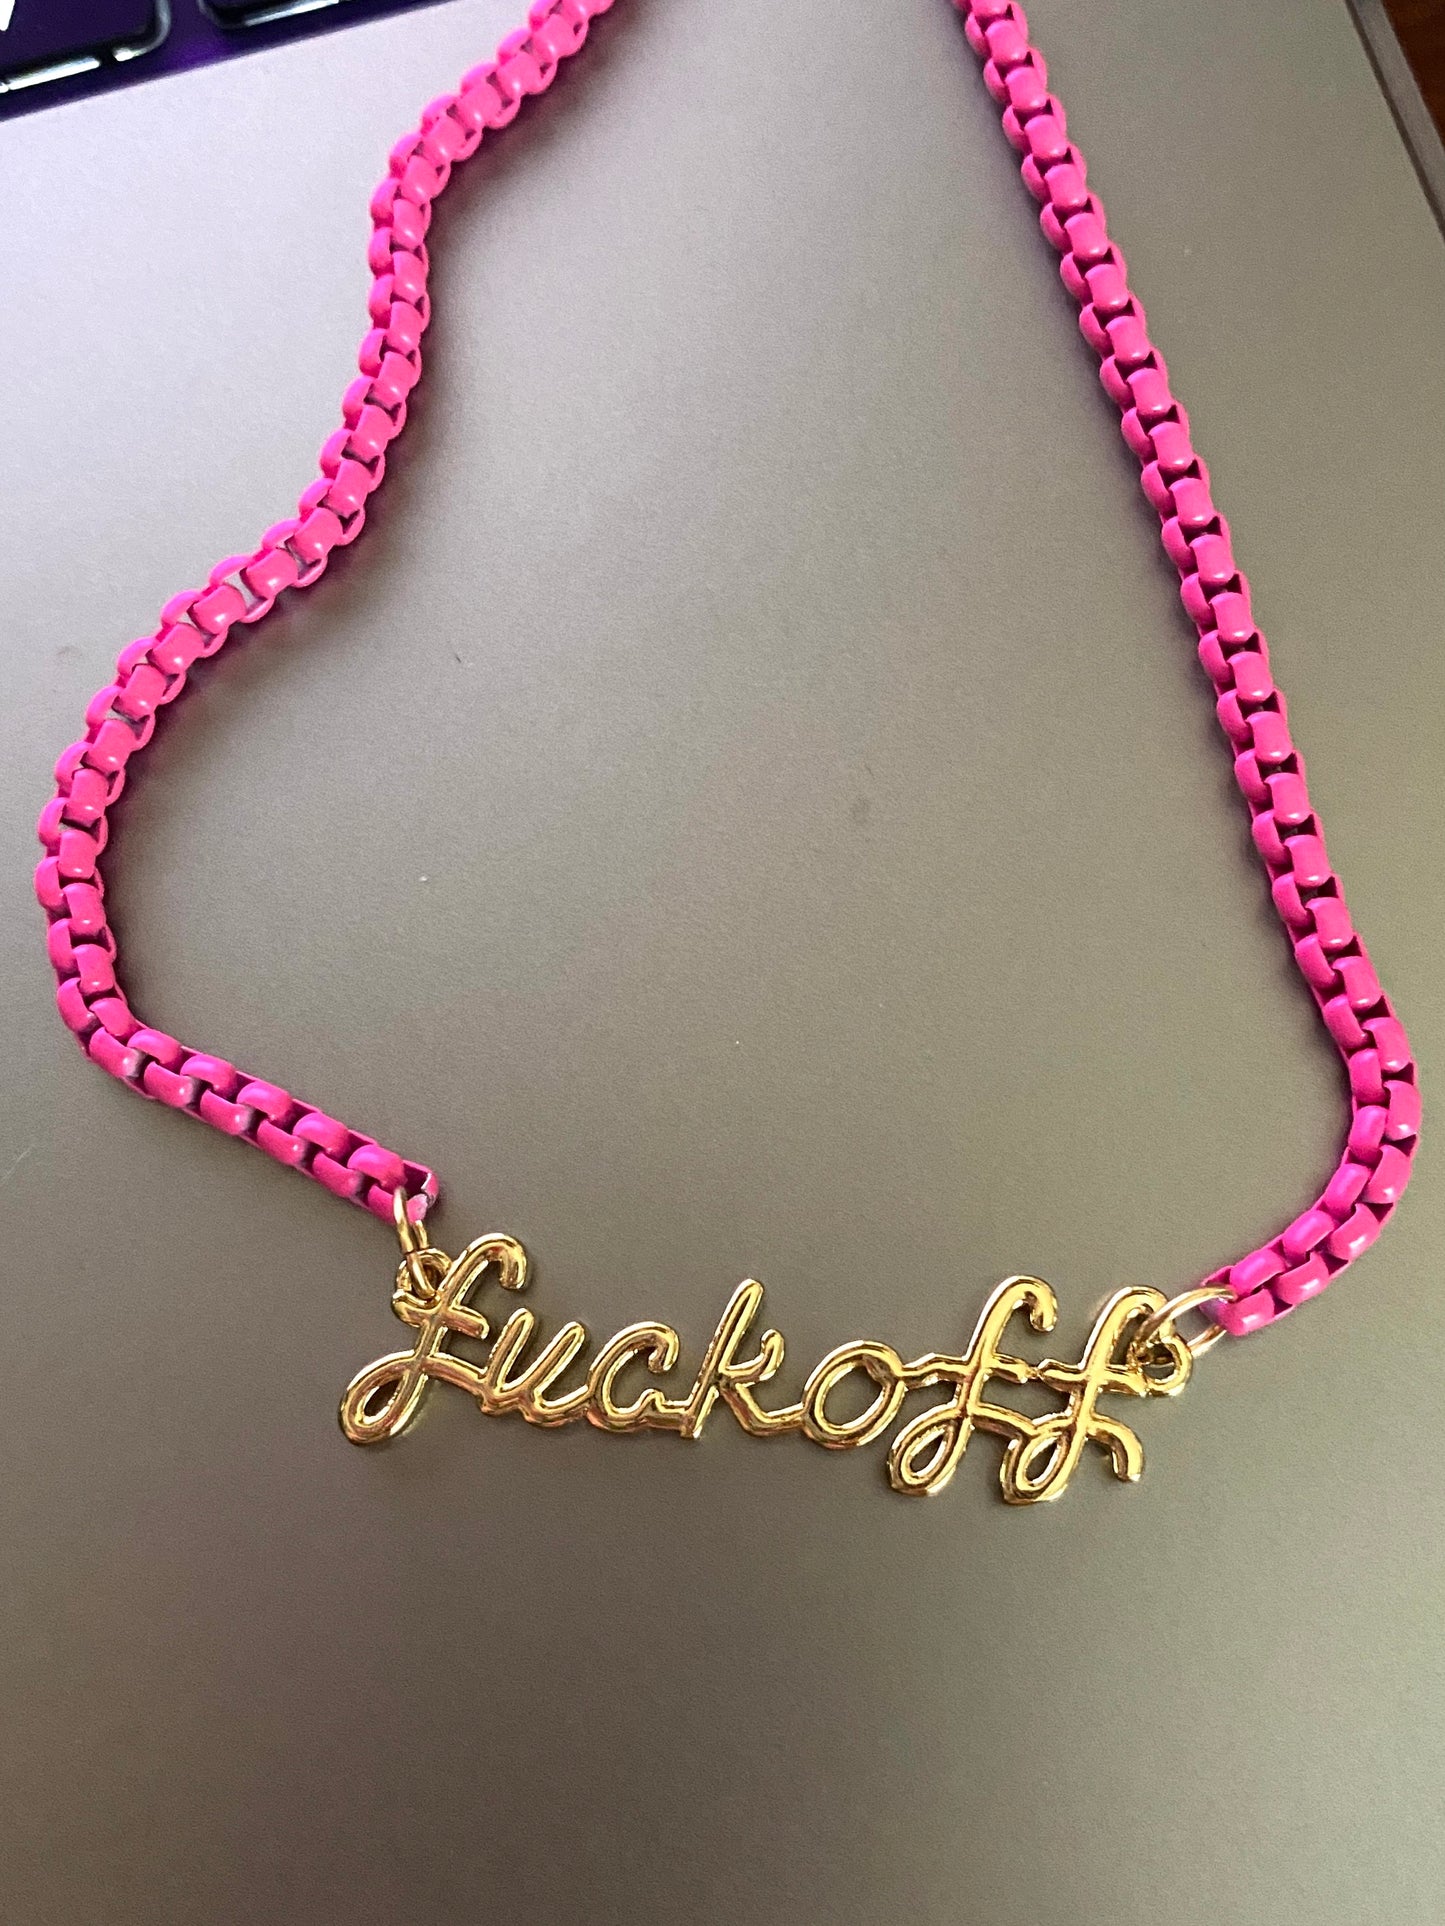 Pink Enamel Box Chain Necklace With Gold Plated "F***off" Connector